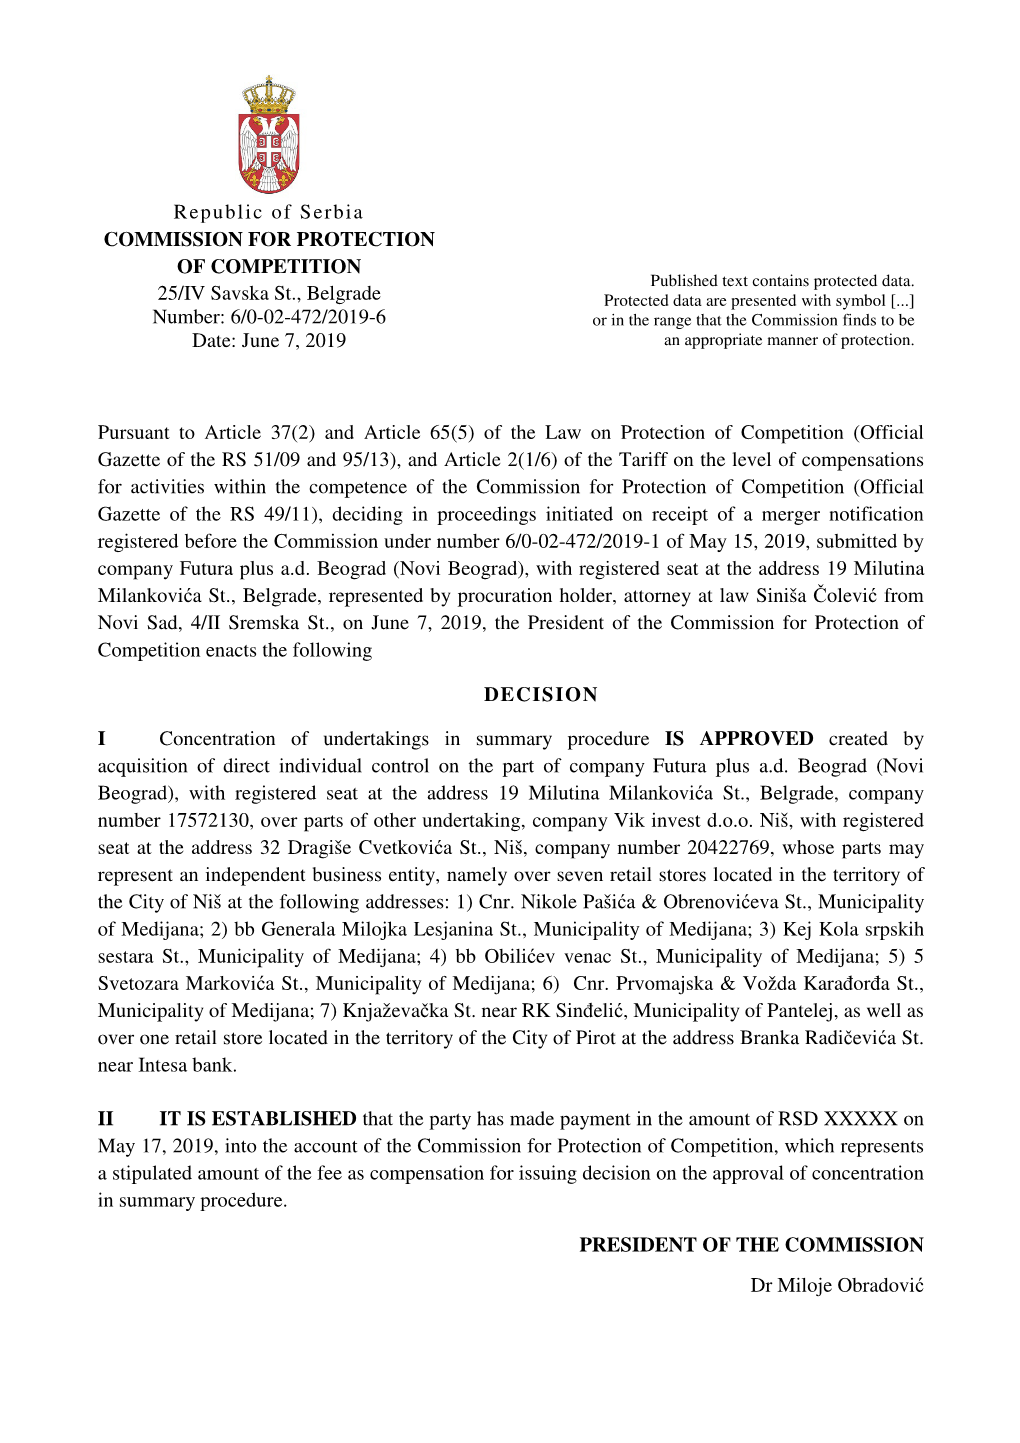 Republic of Serbia COMMISSION for PROTECTION of COMPETITION Published Text Contains Protected Data